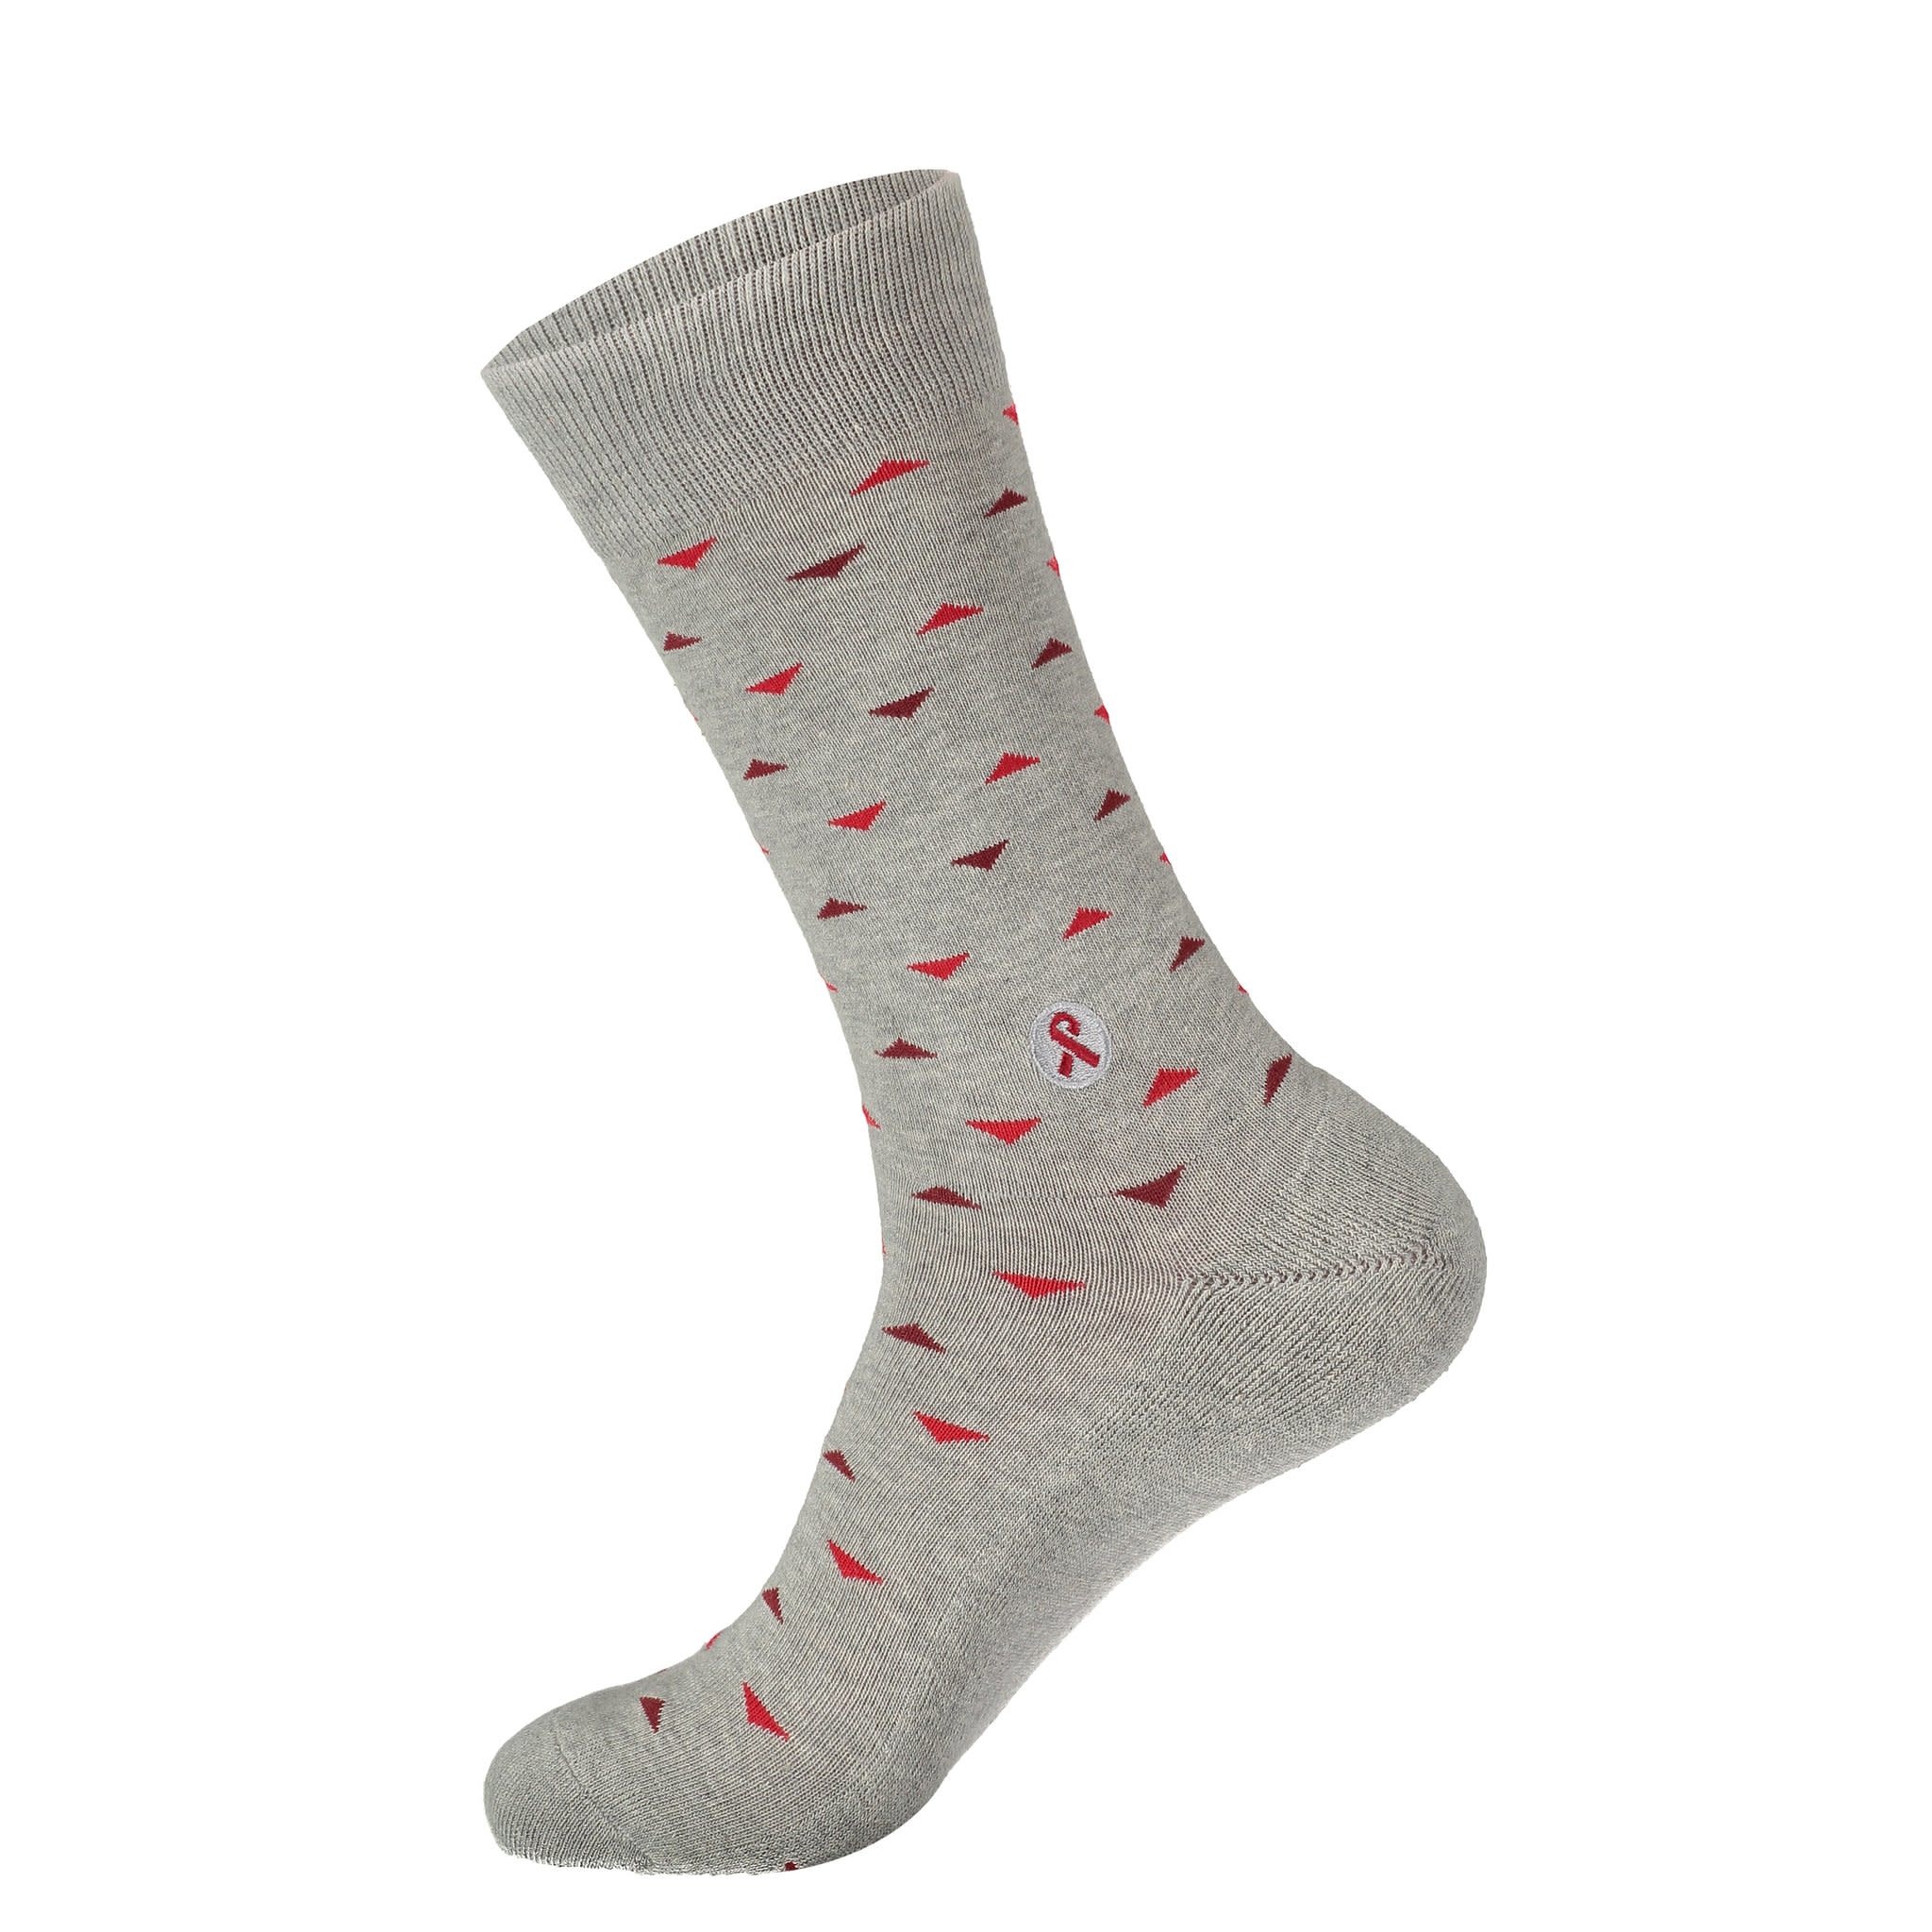 Women's Butterfly Socks That Stop Violence from HumanKind Fair